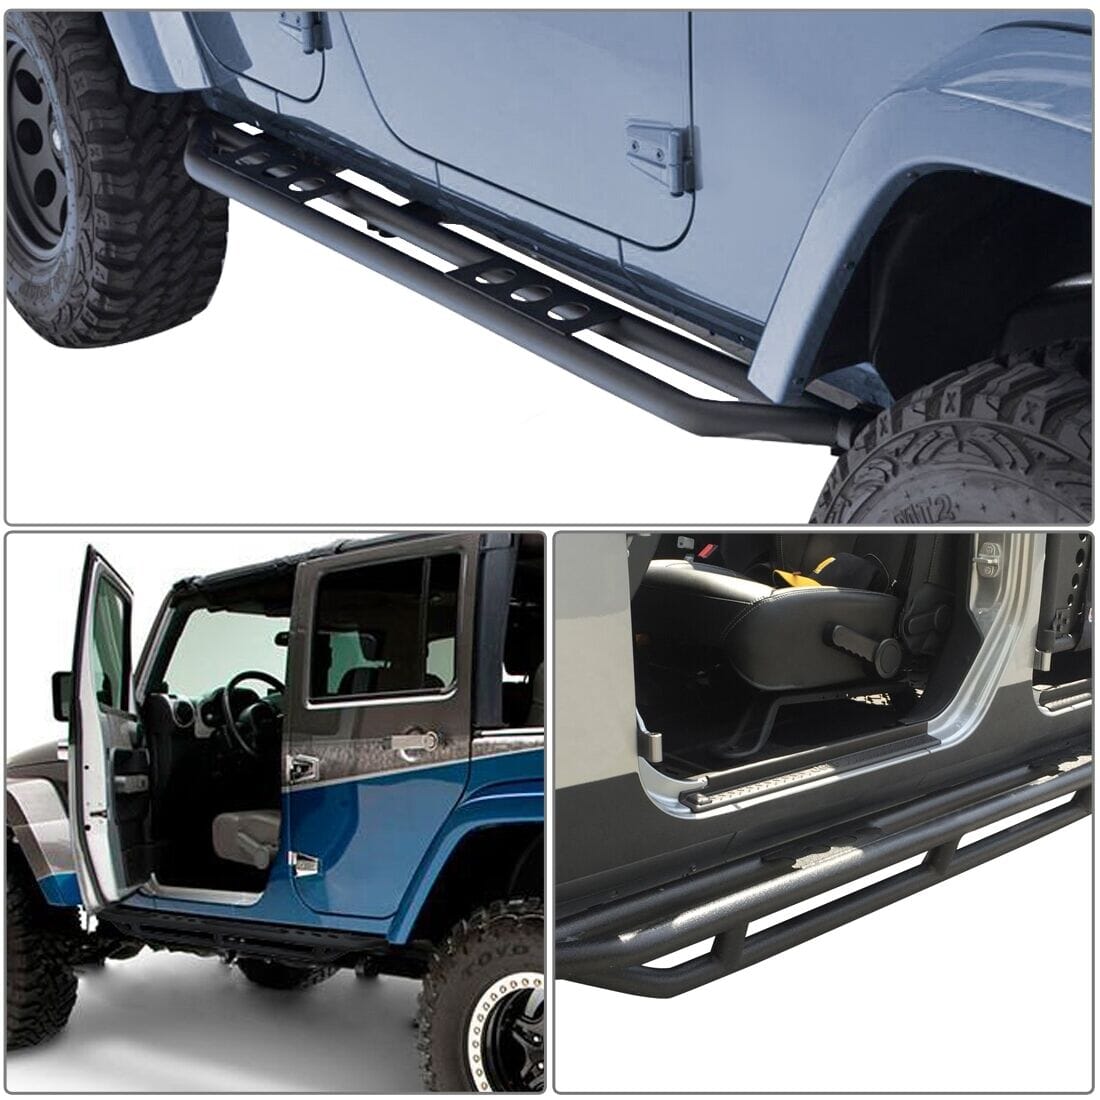 6 Circles Style Side Step Bars for 2007-2018 Jeep Wrangler JK  4 Door